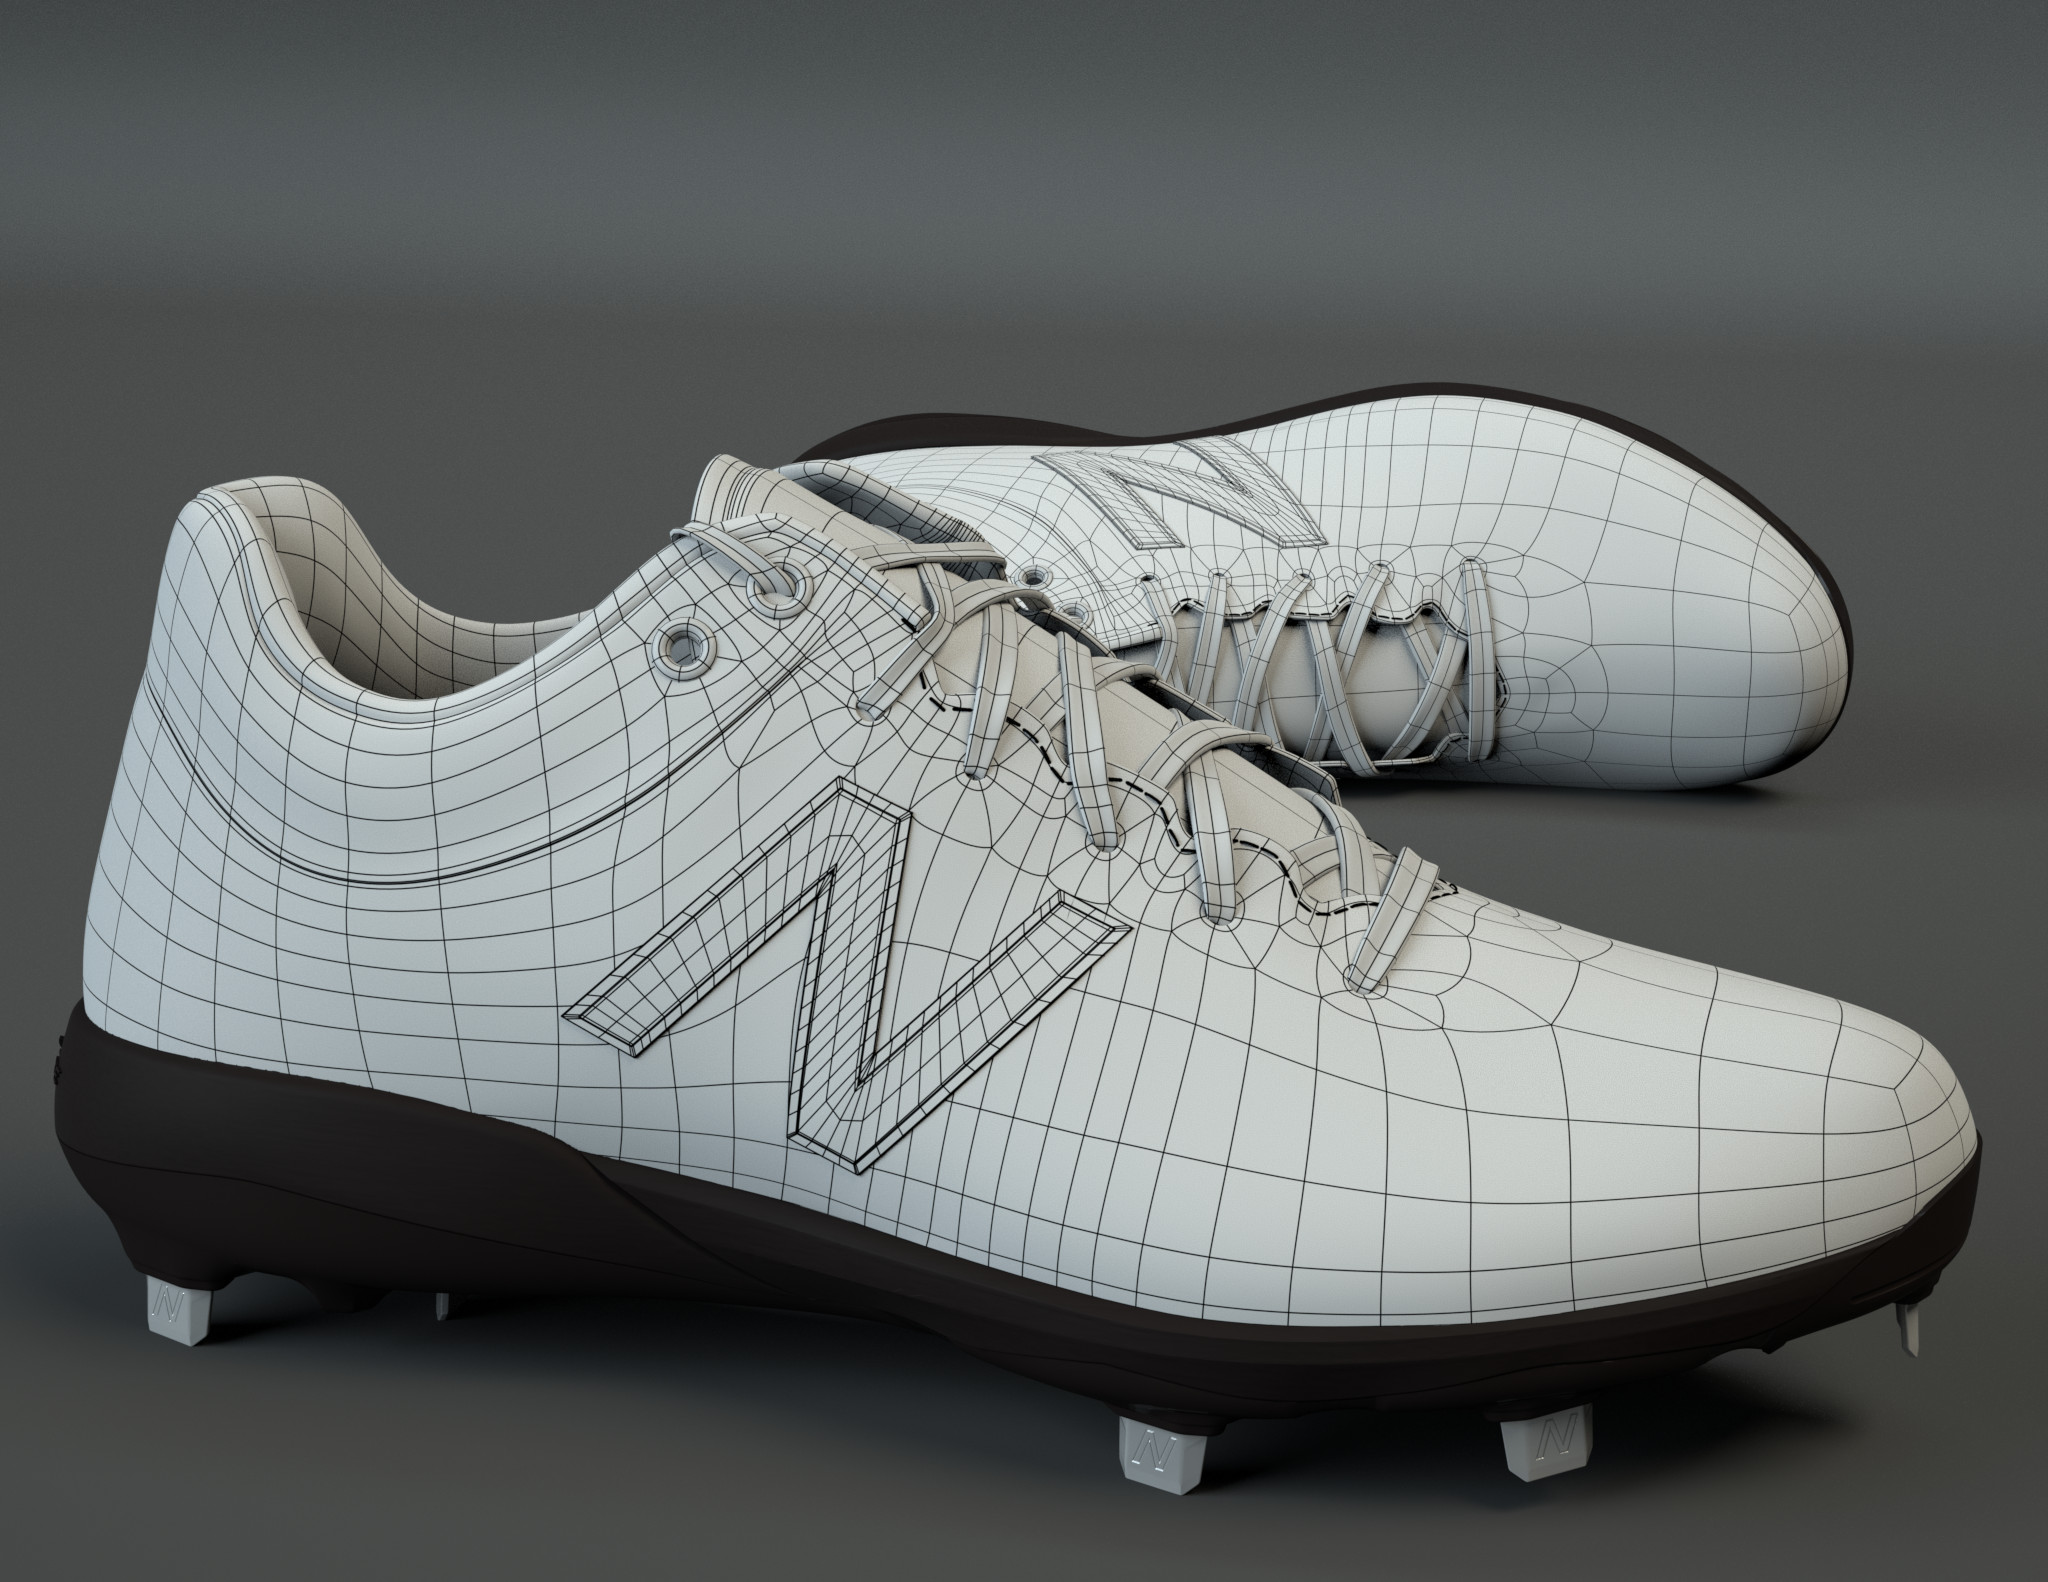 New Balance 4040v5 Wireframe Shoe.
The tooling/sole is from a CAD file.